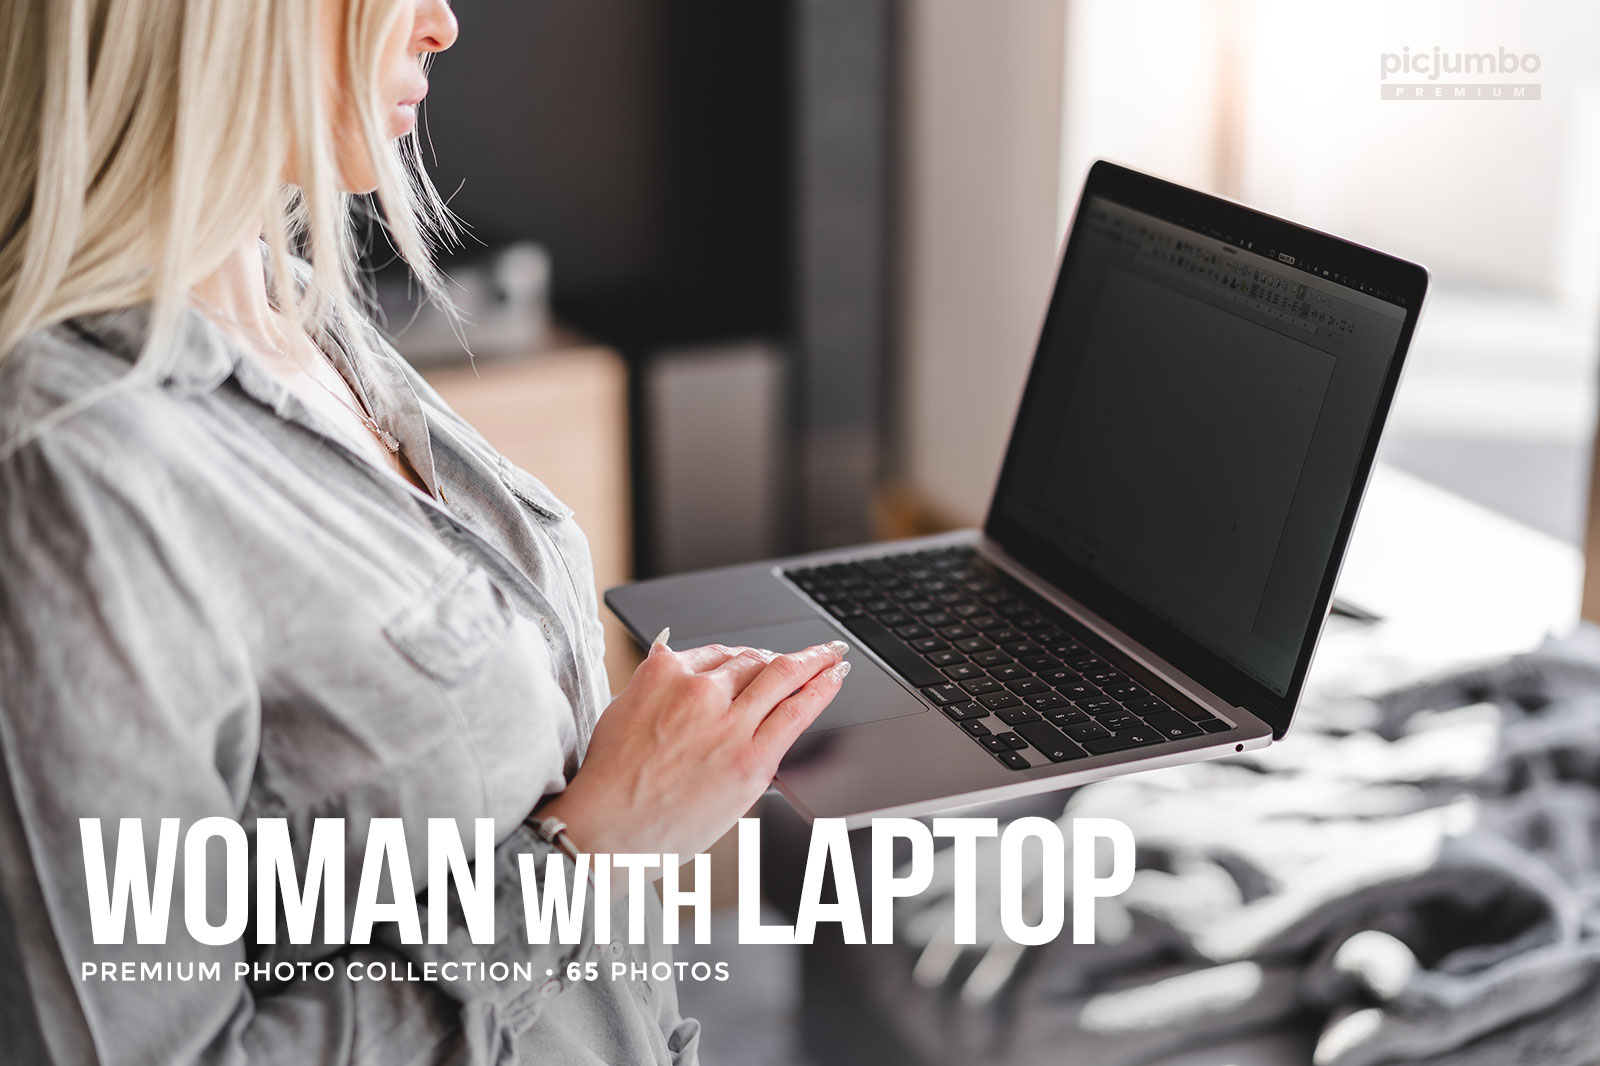 Download hi-res stock photos from our Woman with Laptop PREMIUM Collection!